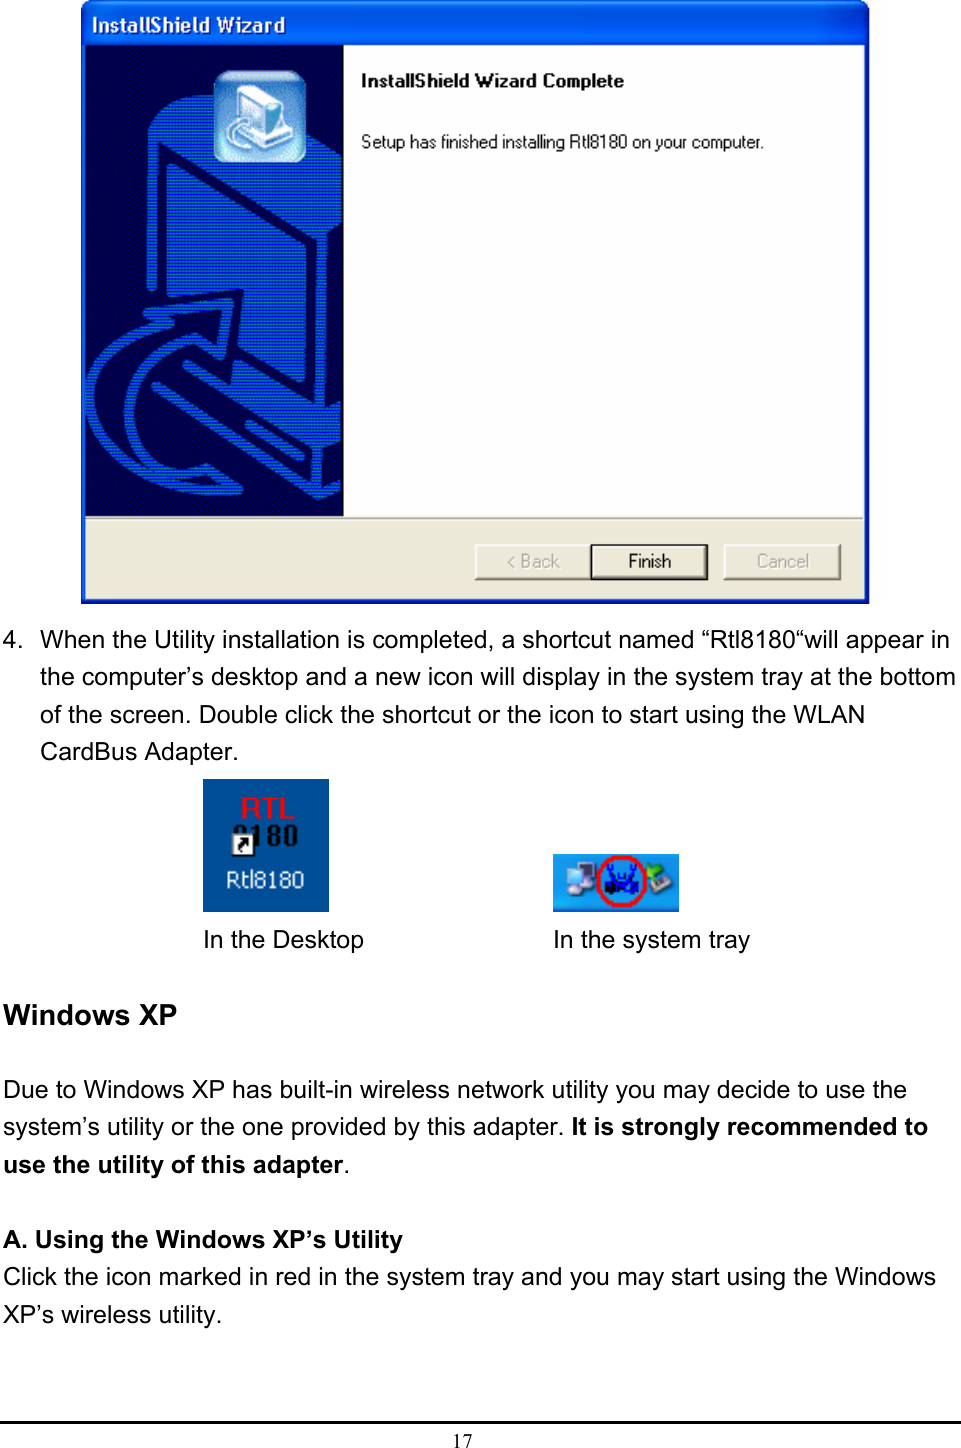  17   4.  When the Utility installation is completed, a shortcut named “Rtl8180“will appear in the computer’s desktop and a new icon will display in the system tray at the bottom of the screen. Double click the shortcut or the icon to start using the WLAN CardBus Adapter.        In the Desktop        In the system tray  Windows XP  Due to Windows XP has built-in wireless network utility you may decide to use the system’s utility or the one provided by this adapter. It is strongly recommended to use the utility of this adapter.  A. Using the Windows XP’s Utility Click the icon marked in red in the system tray and you may start using the Windows XP’s wireless utility.  